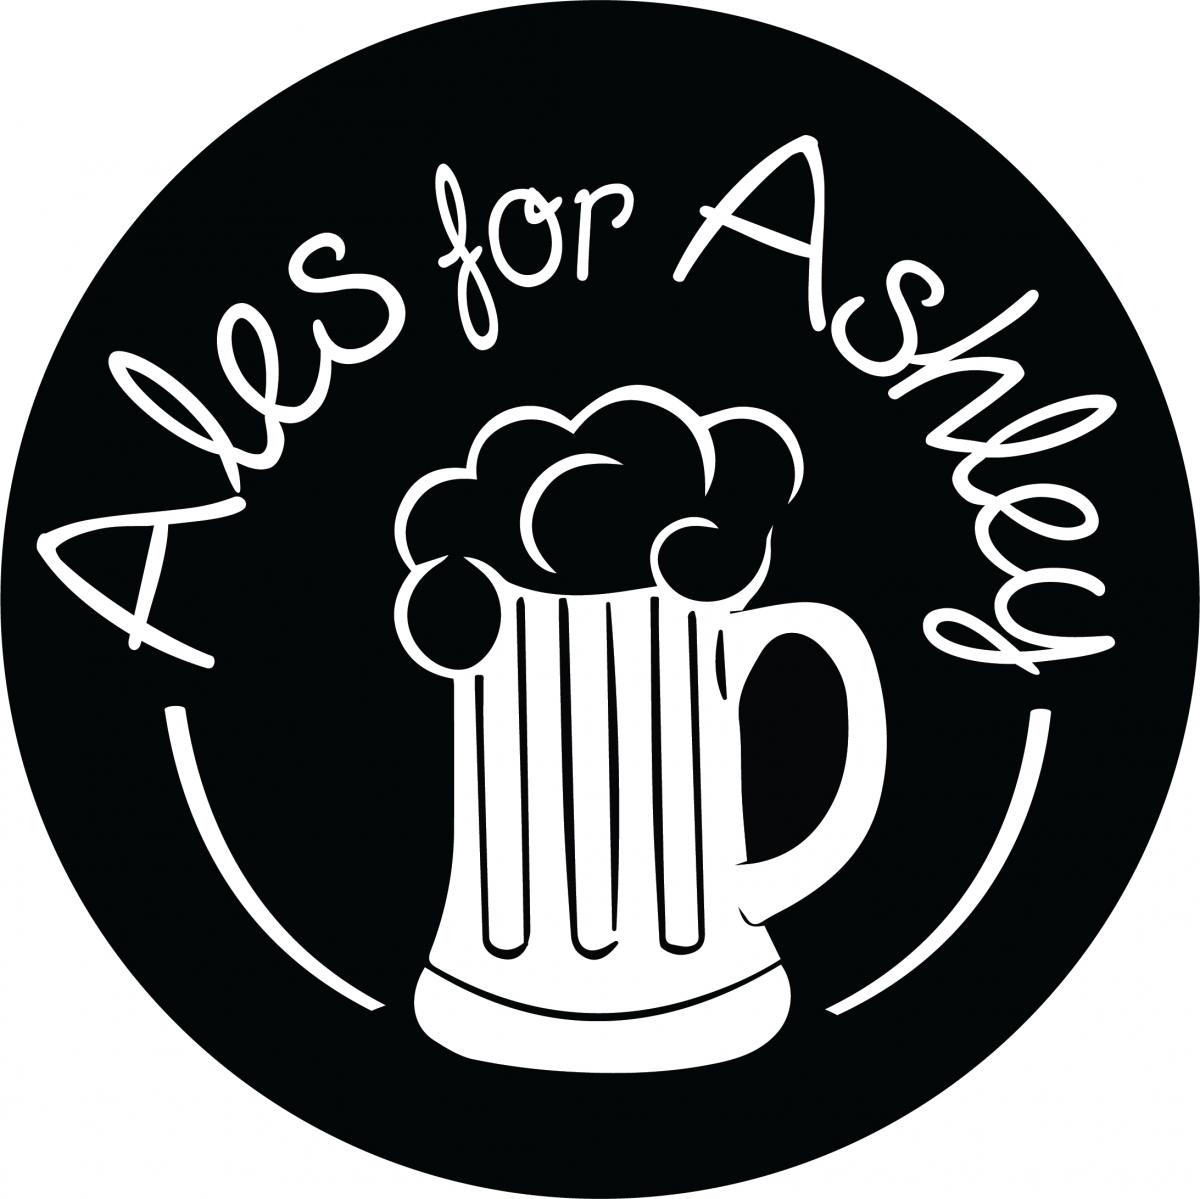 Ales for Ashley-A Fundraiser for Glioblastoma brain cancer research cover image